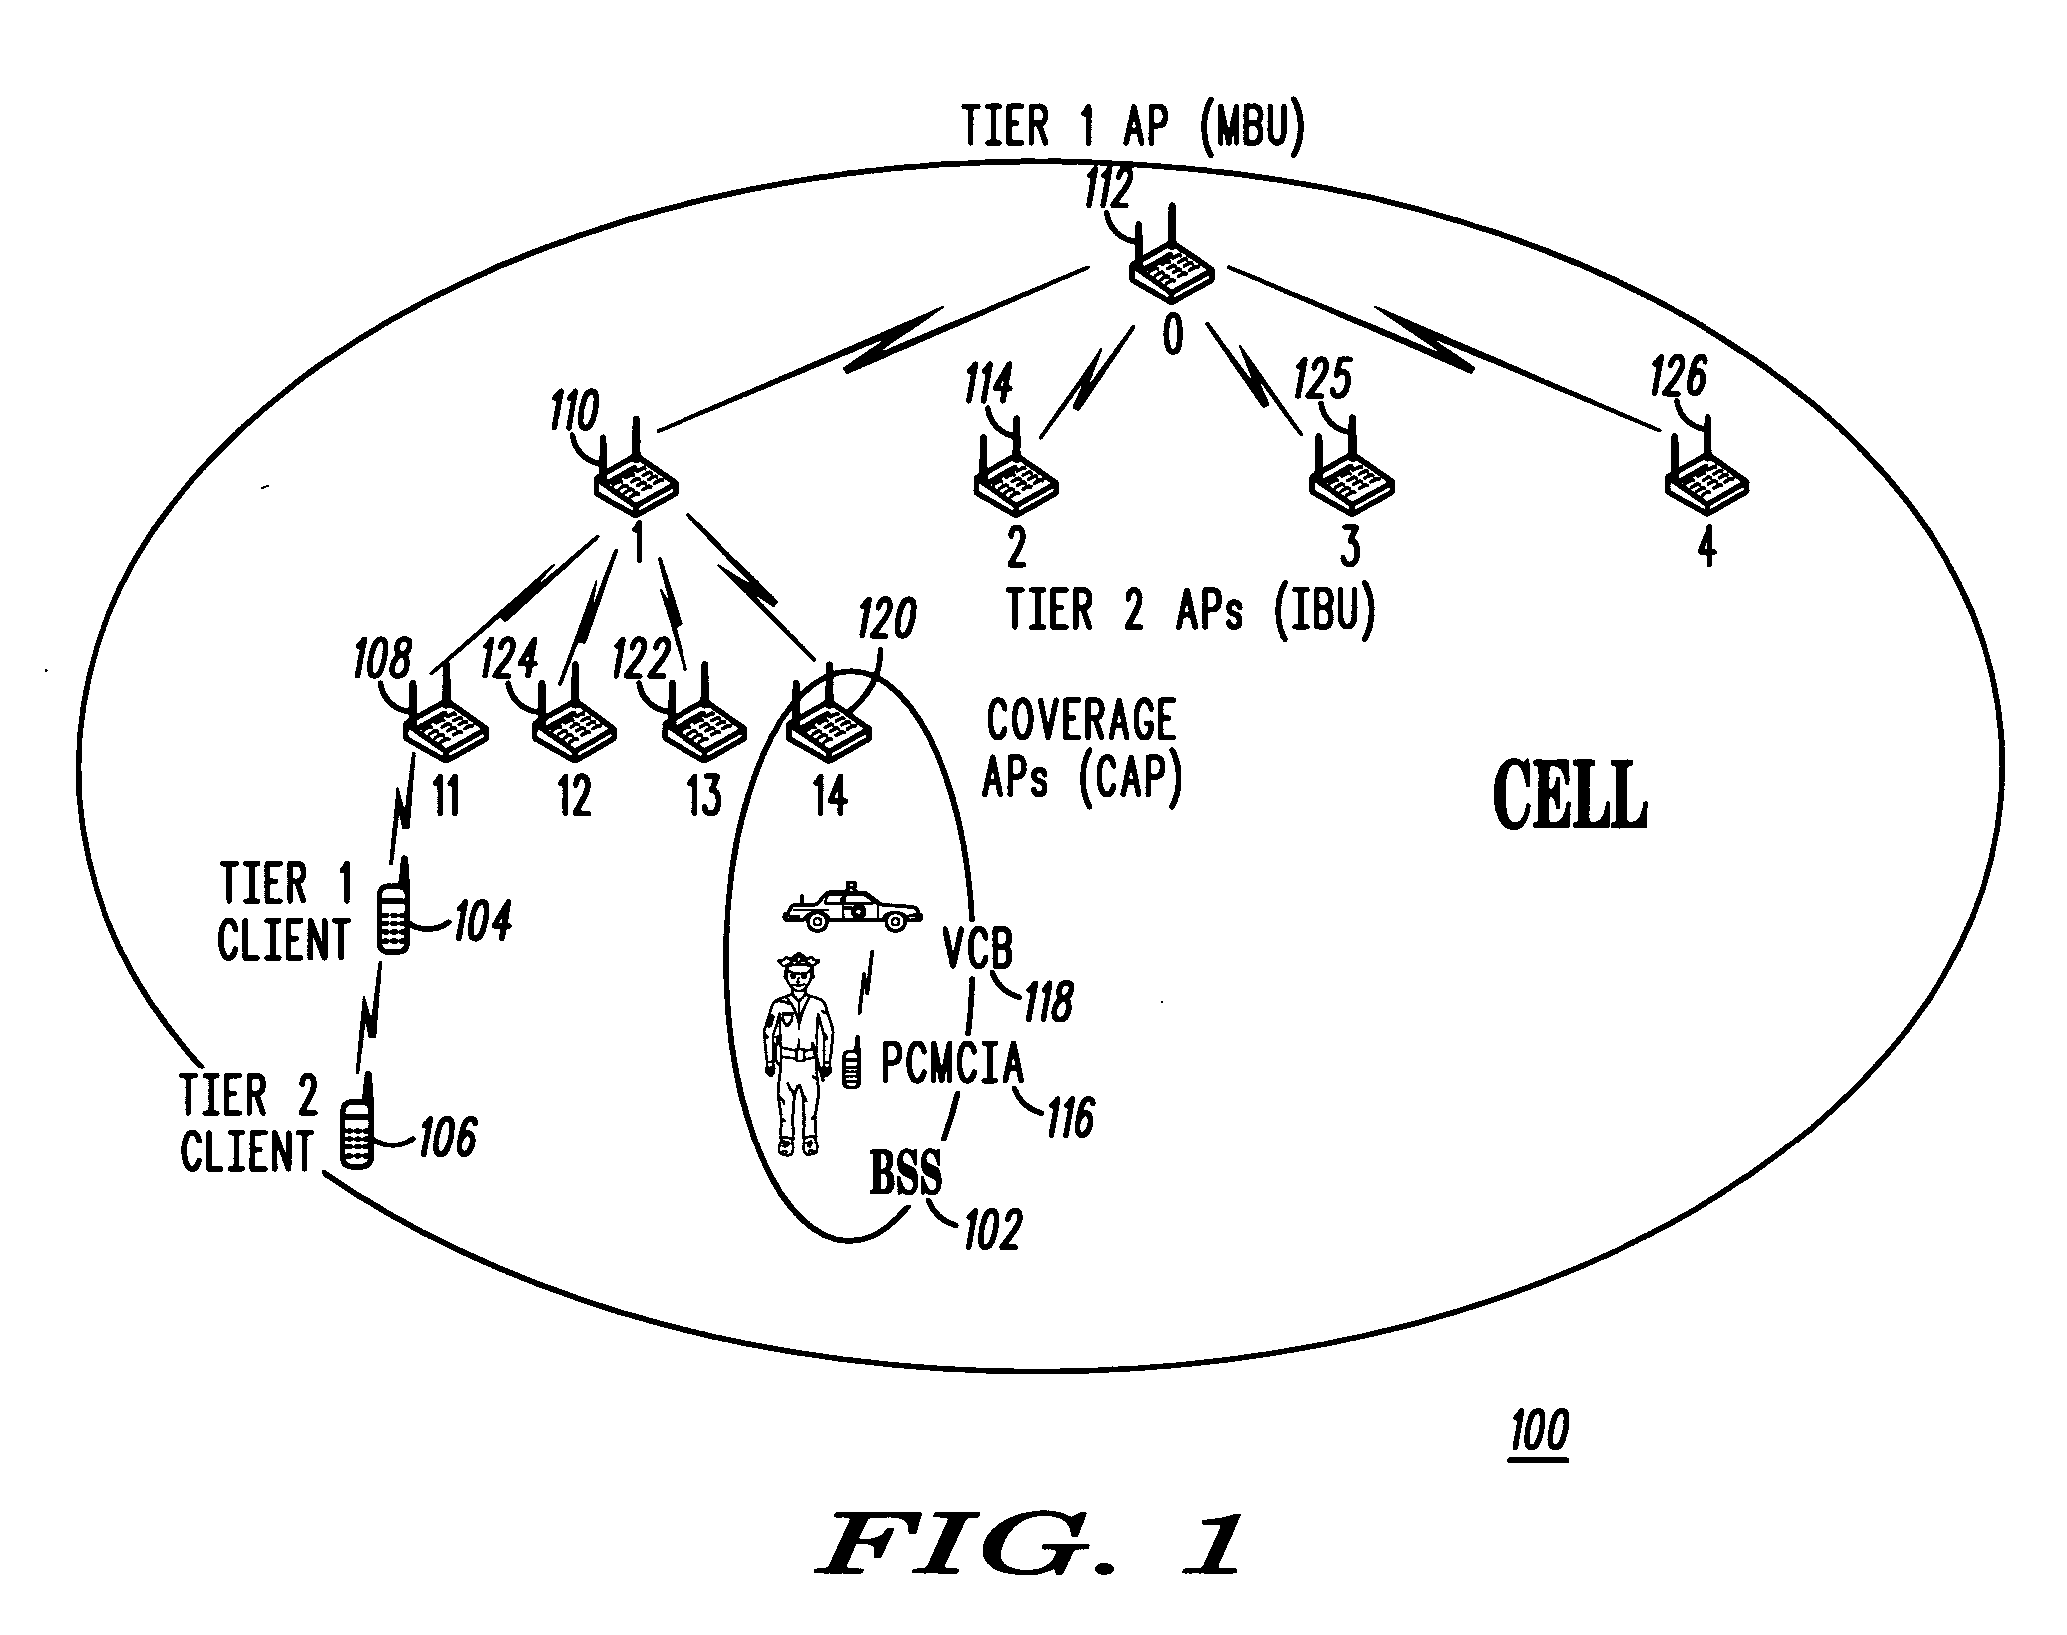 Method for performing neighbor discovery in a multi-tier WLAN